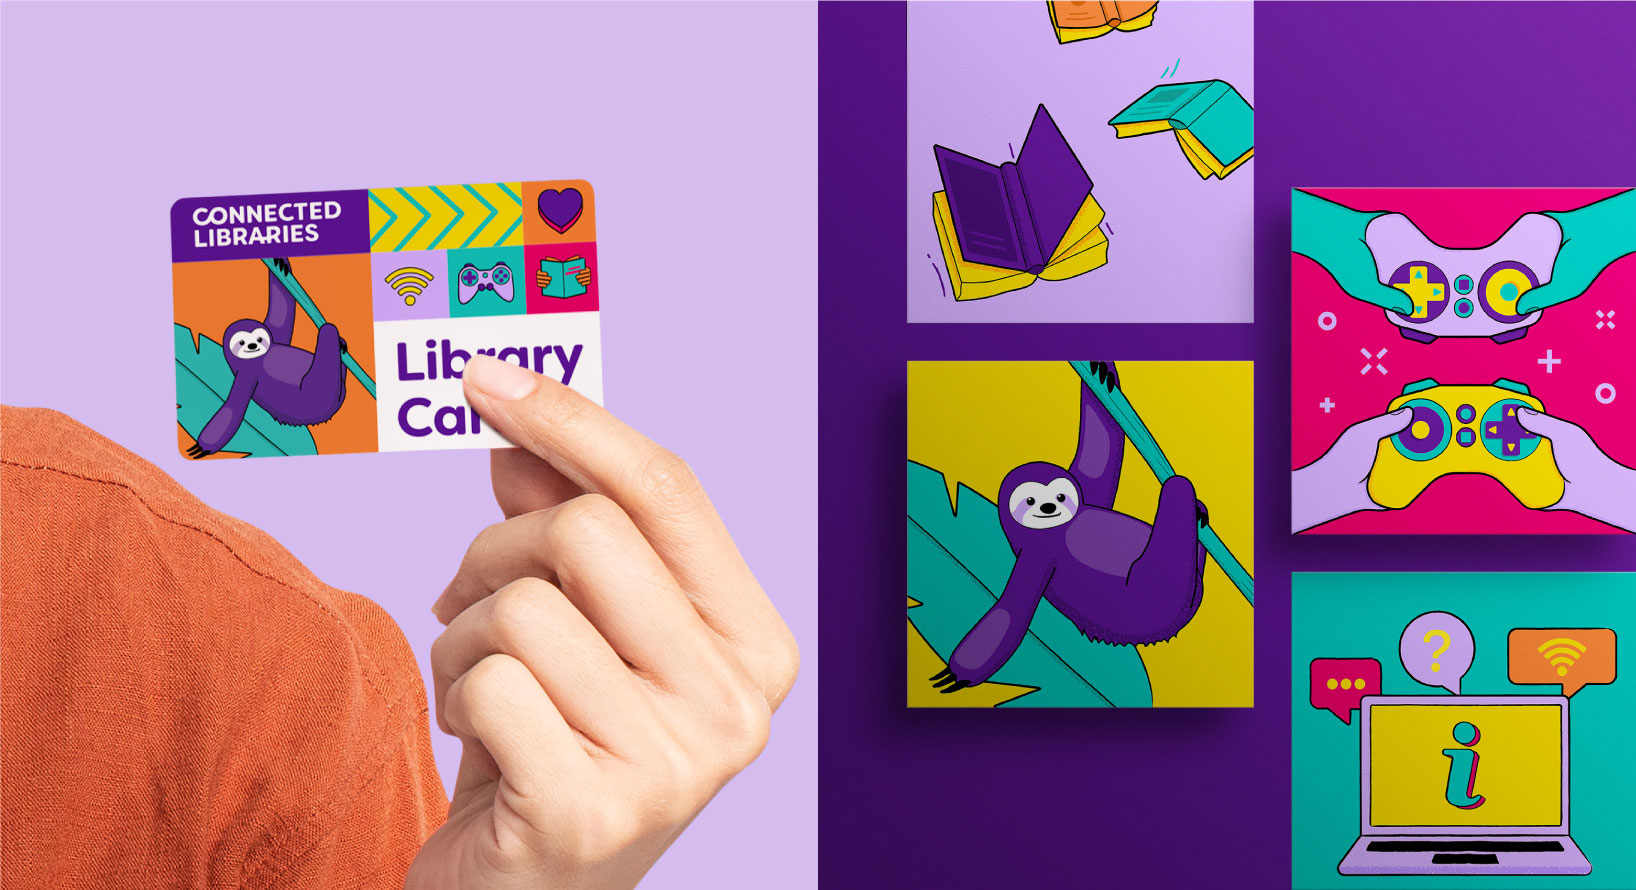 Hand holding a CCL Library Card adjacent to illustrations on a flat purple background